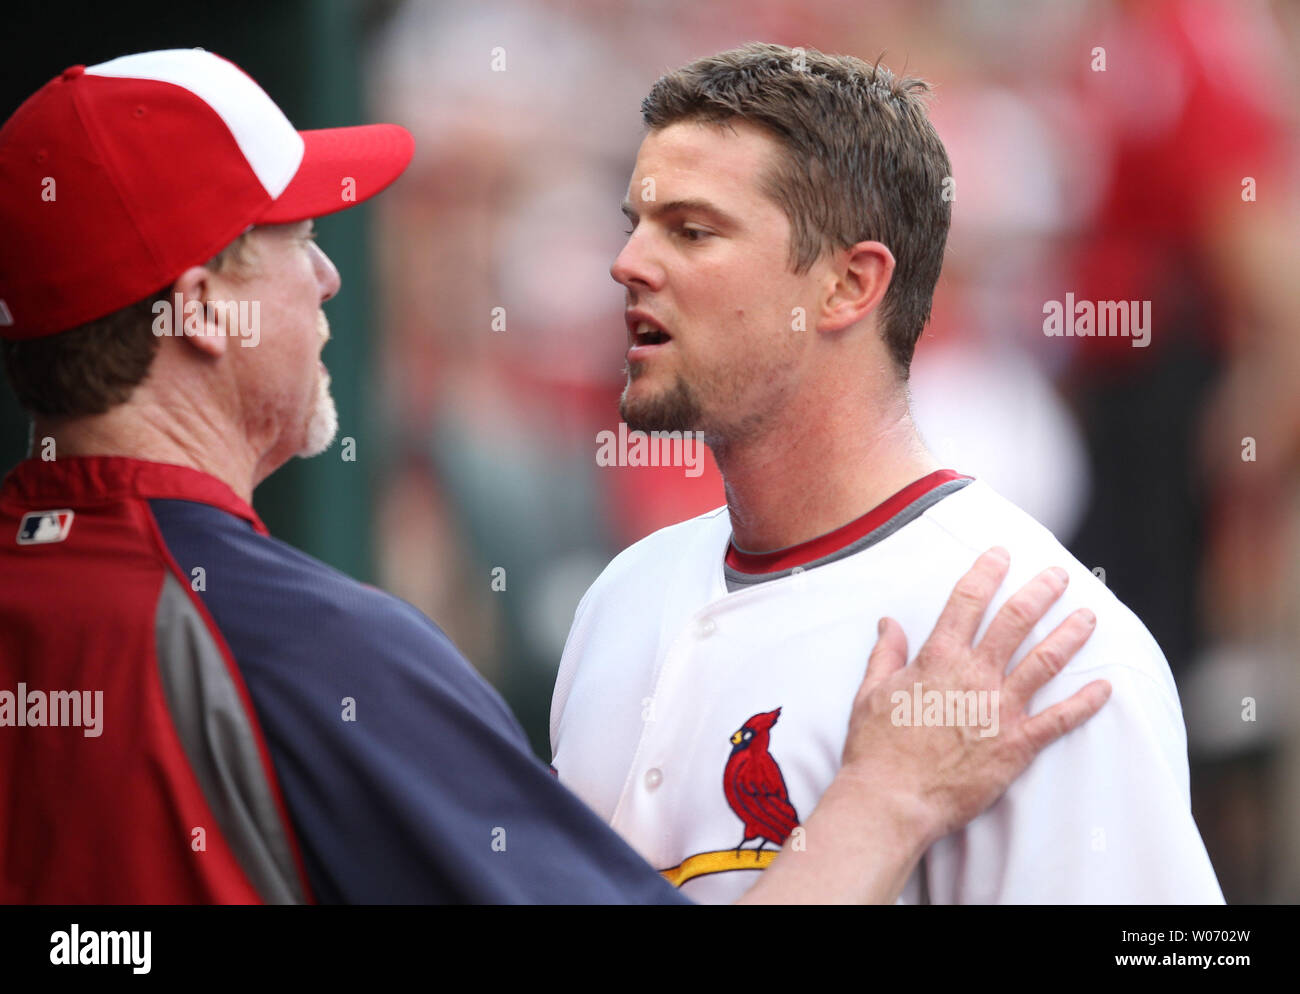 St. Louis Cardinals manager Mike Matheny and Mark McGwire watch